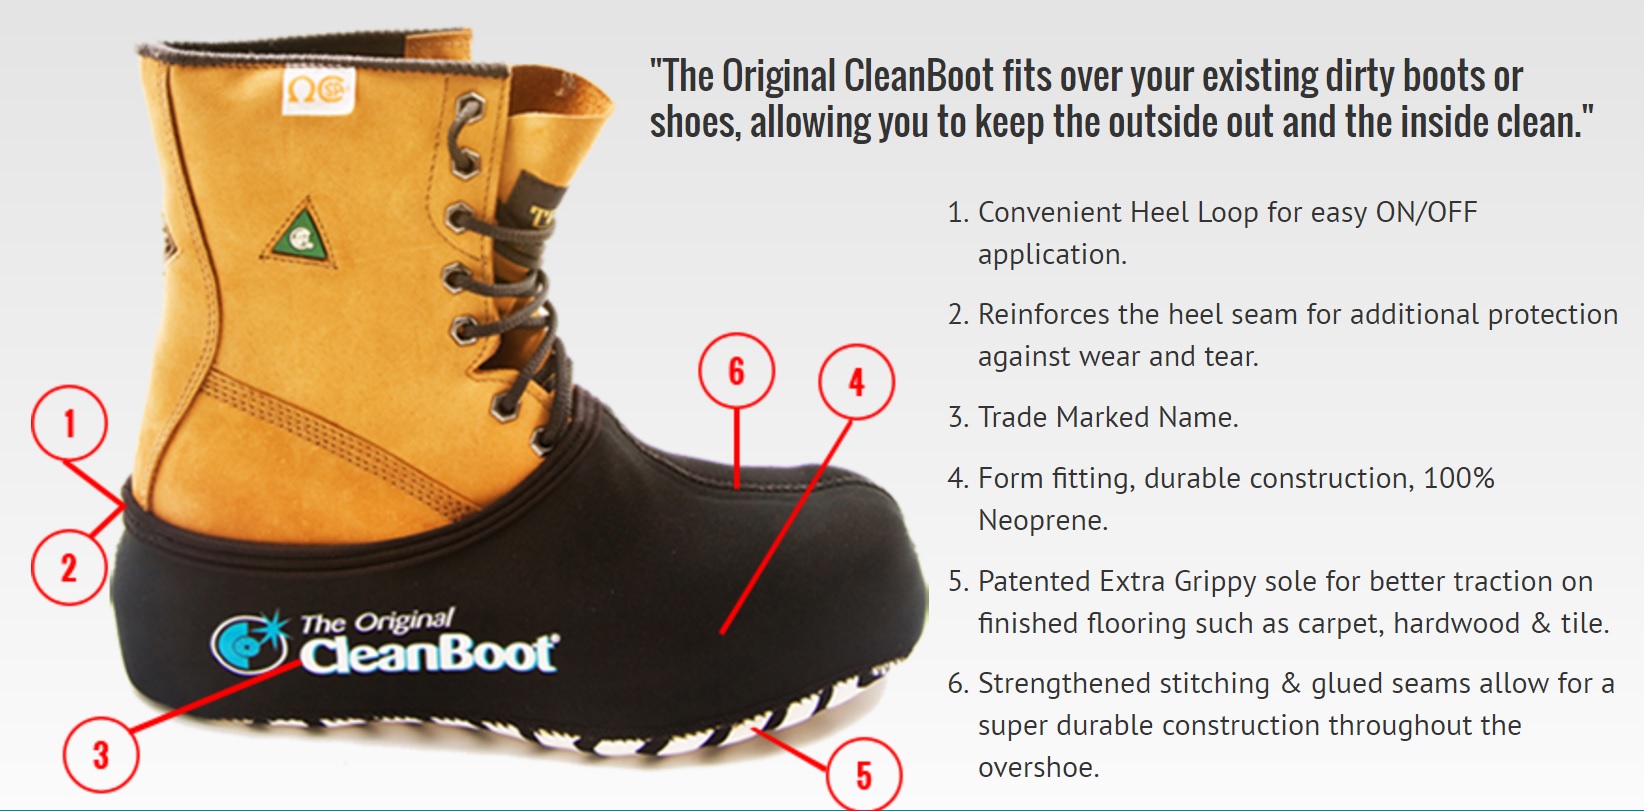 CleanBoot - Reusable Boot/Shoe cover to 